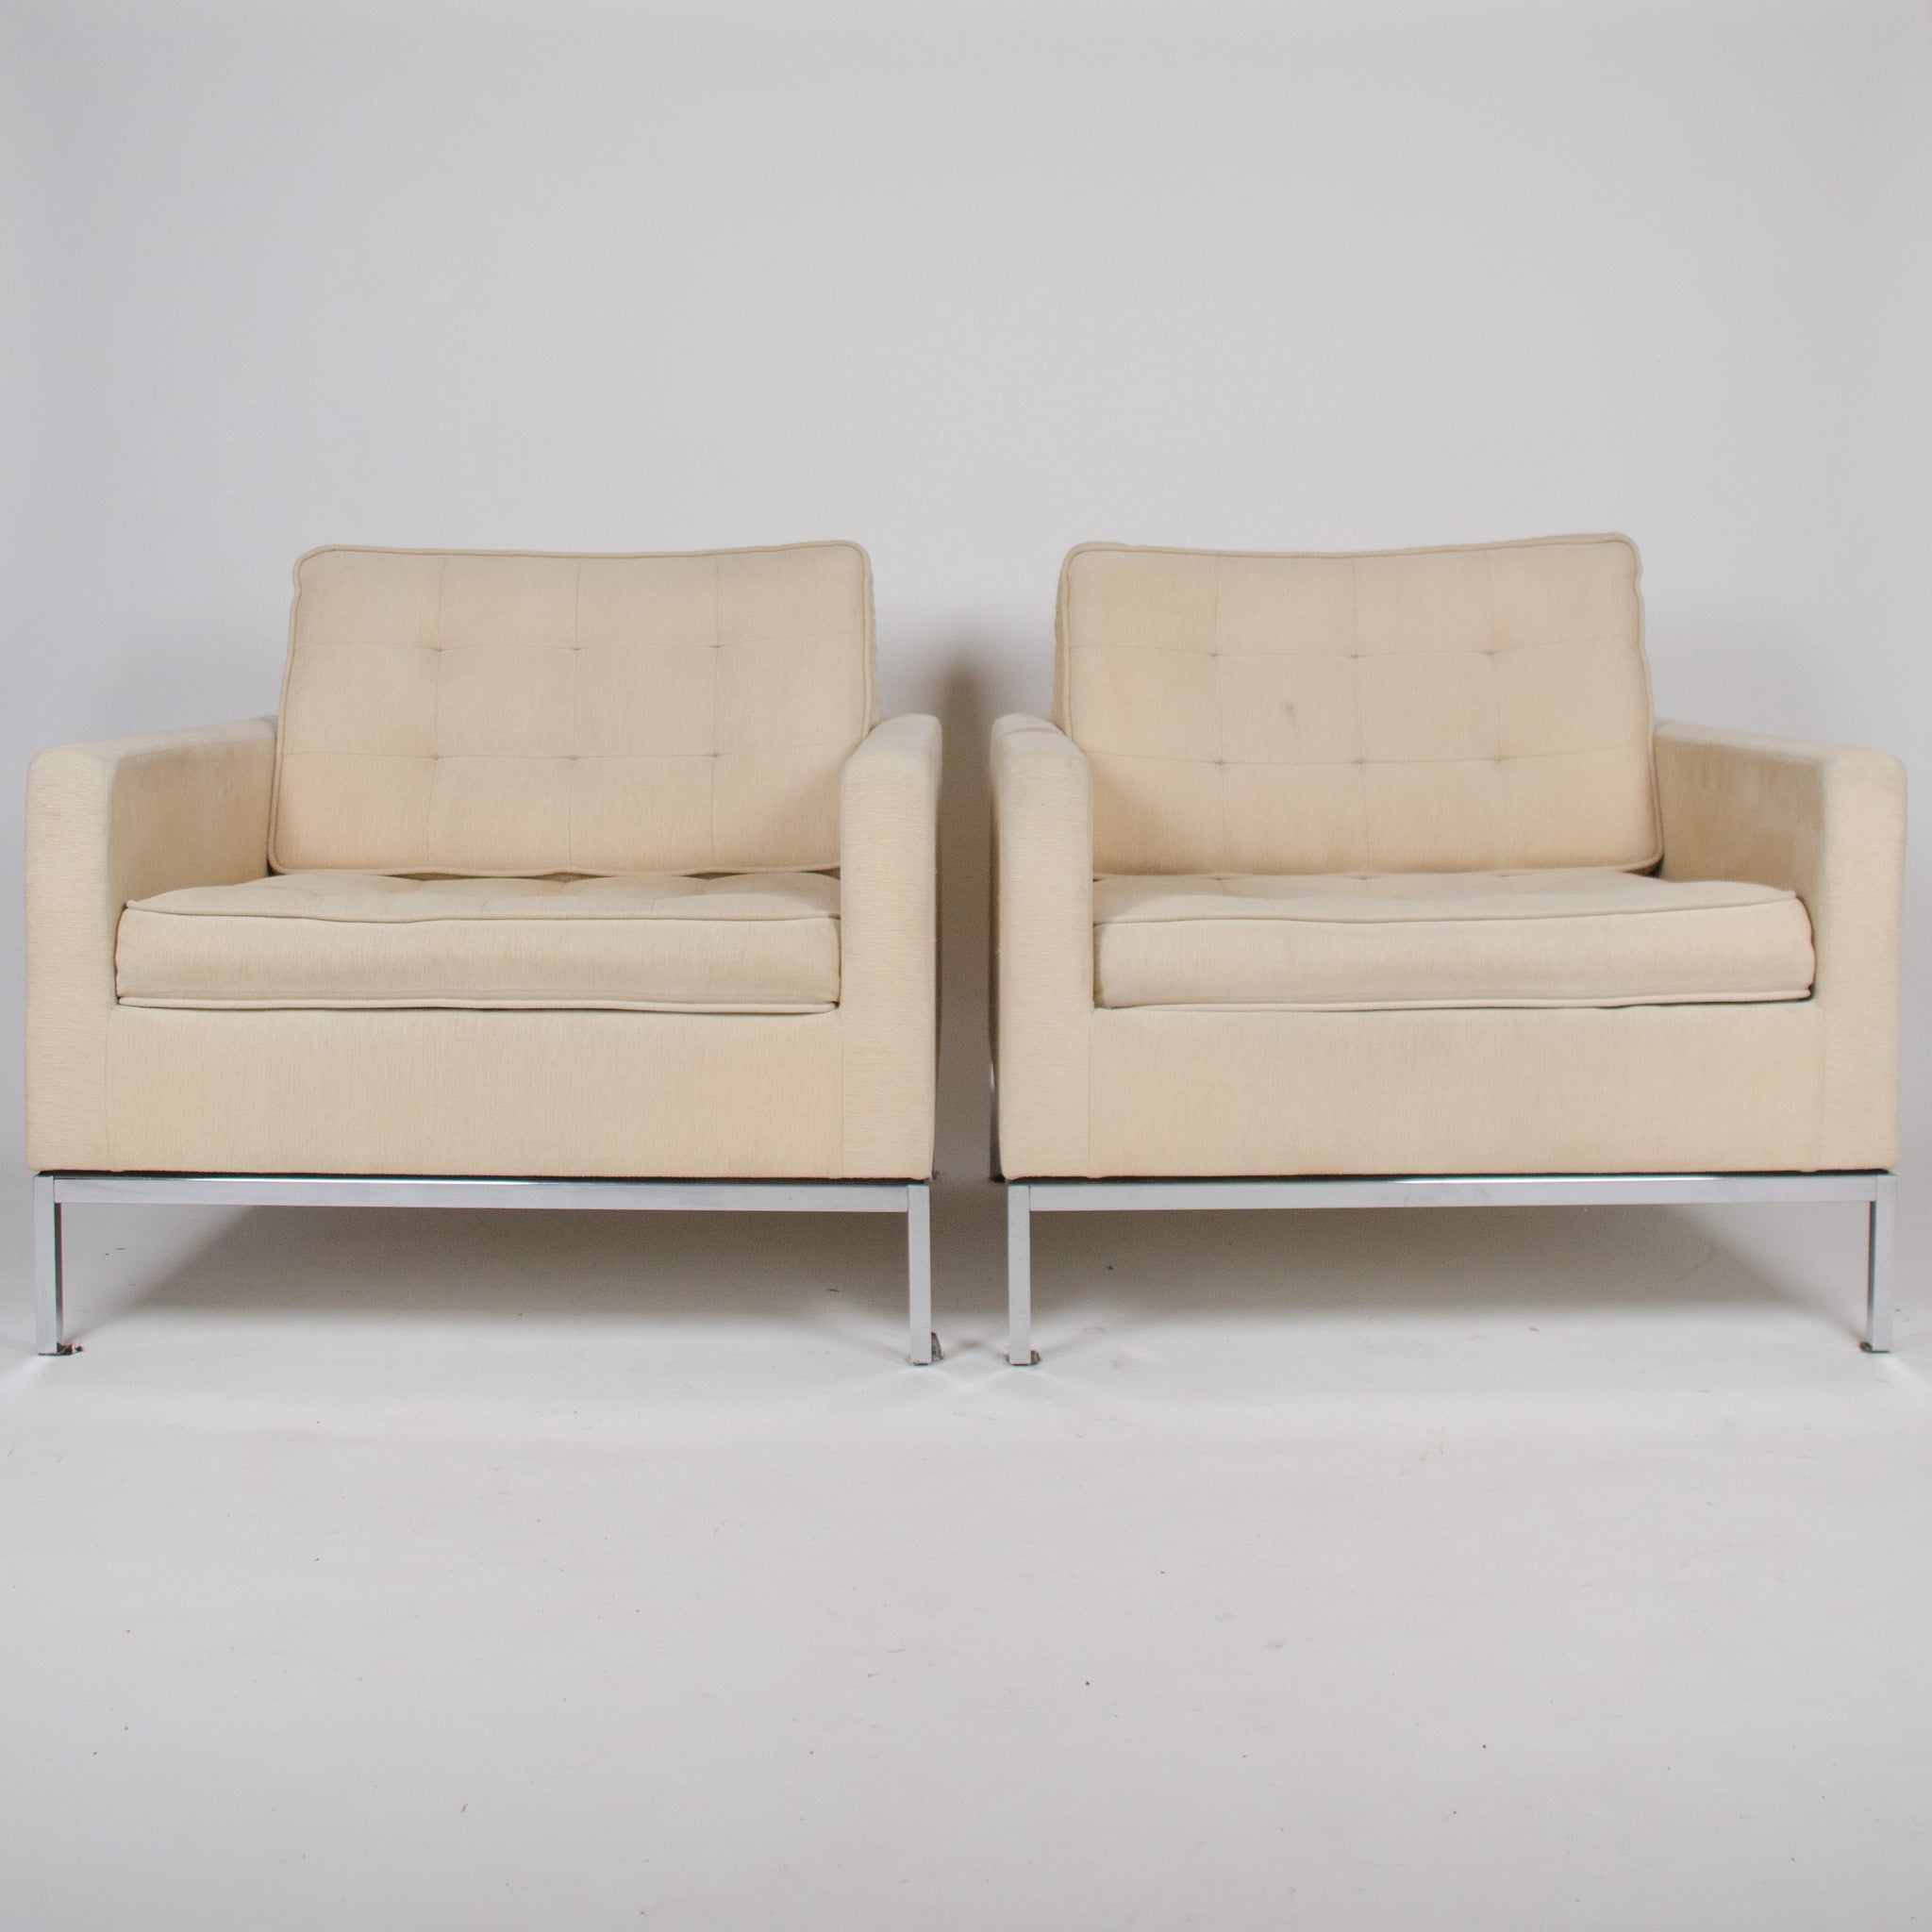 SOLD Matrix International Florence Knoll Lounge Chairs, Fabric, Made In Italy